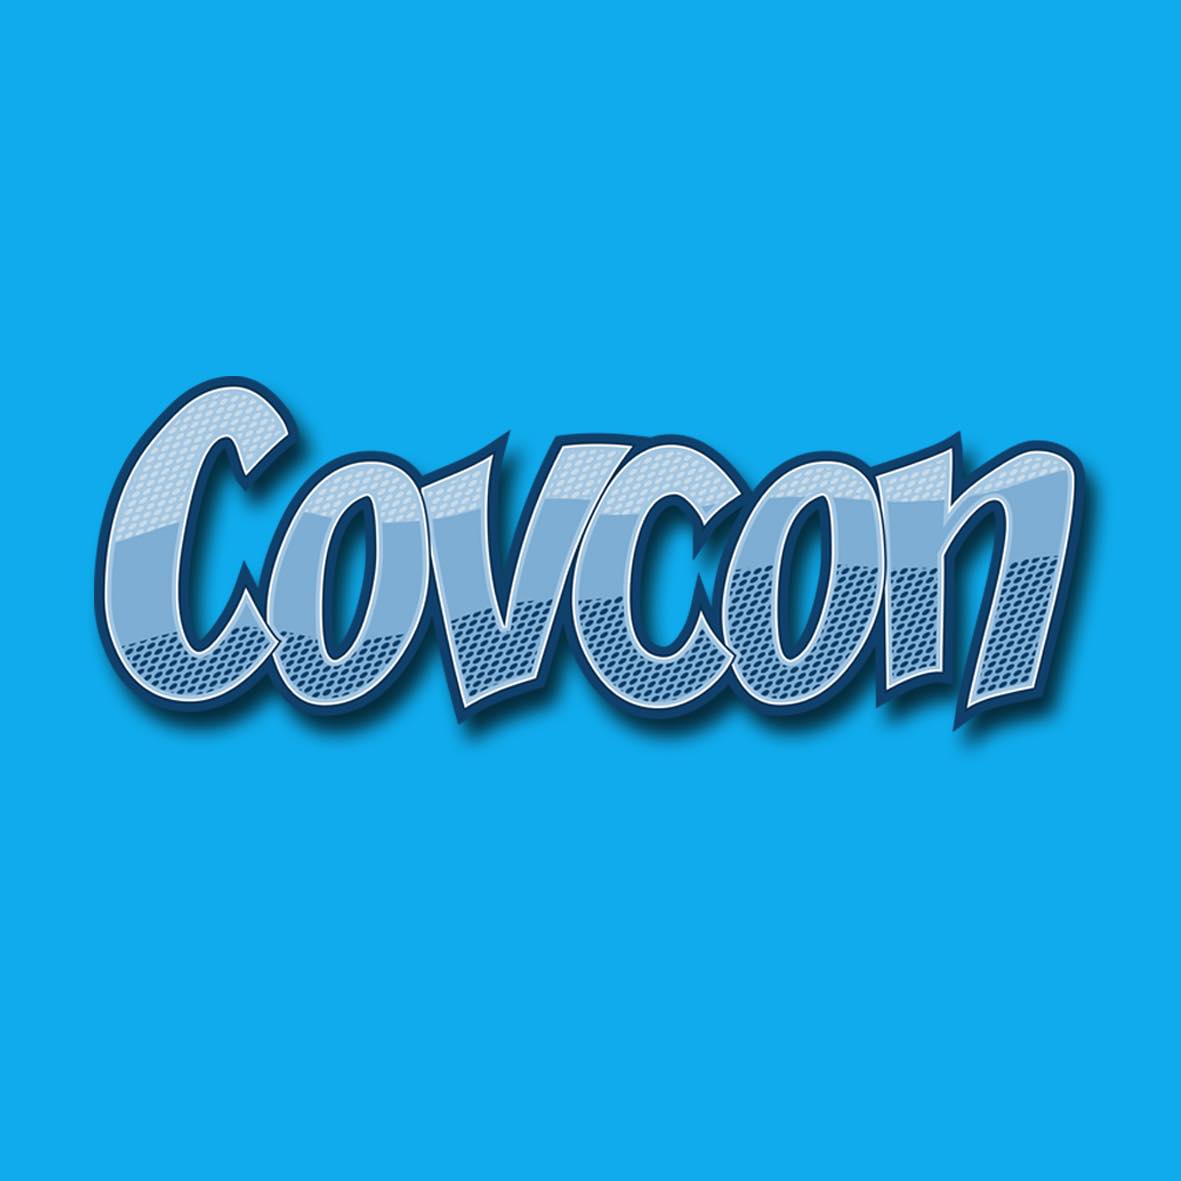 Featured image for “CONVENTION REVIEW : COVCON 2022”